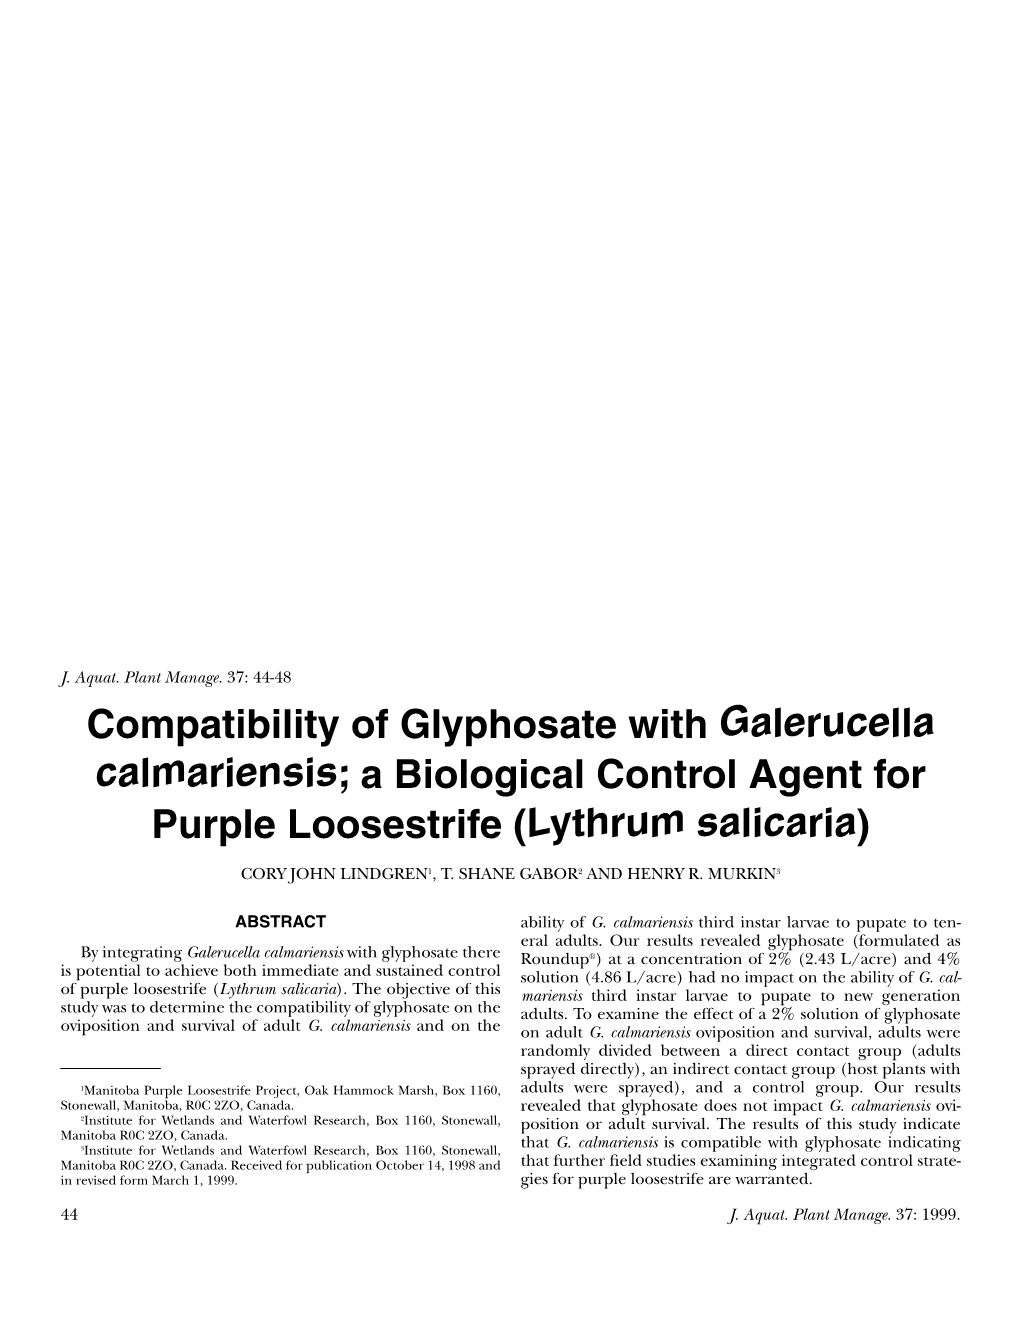 Compatibility of Glyphosate with Galerucella Calmariensis; a Biological Control Agent for Purple Loosestrife (Lythrum Salicaria)